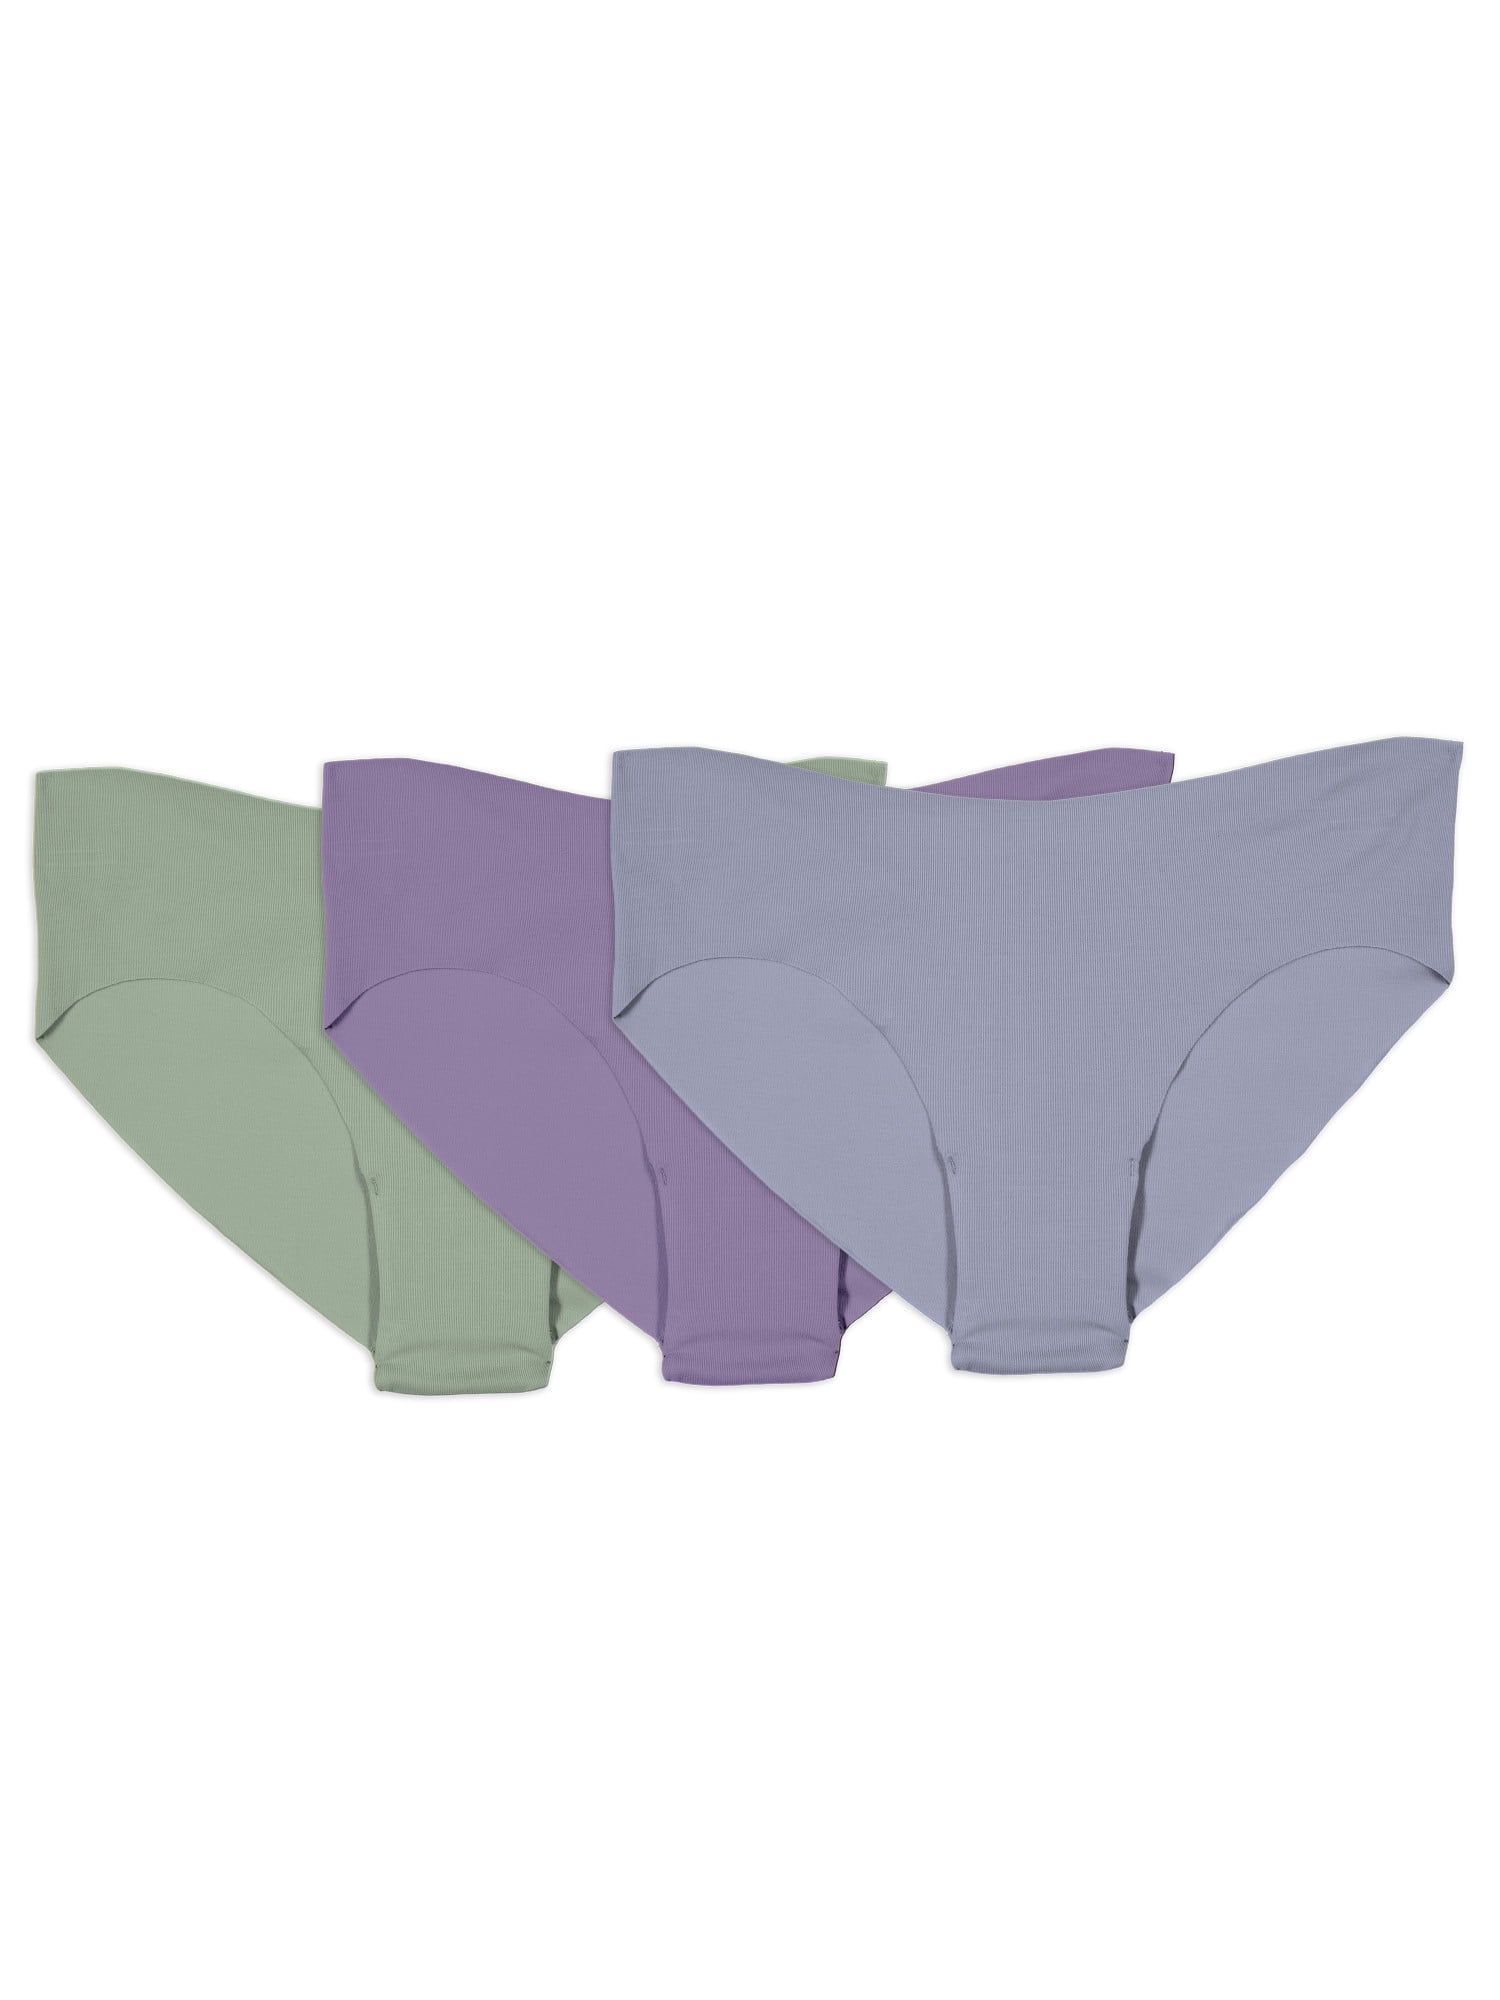 Fruit of the Loom Women's No Show Thong Underwear, 3 Pack, Sizes 5-9 